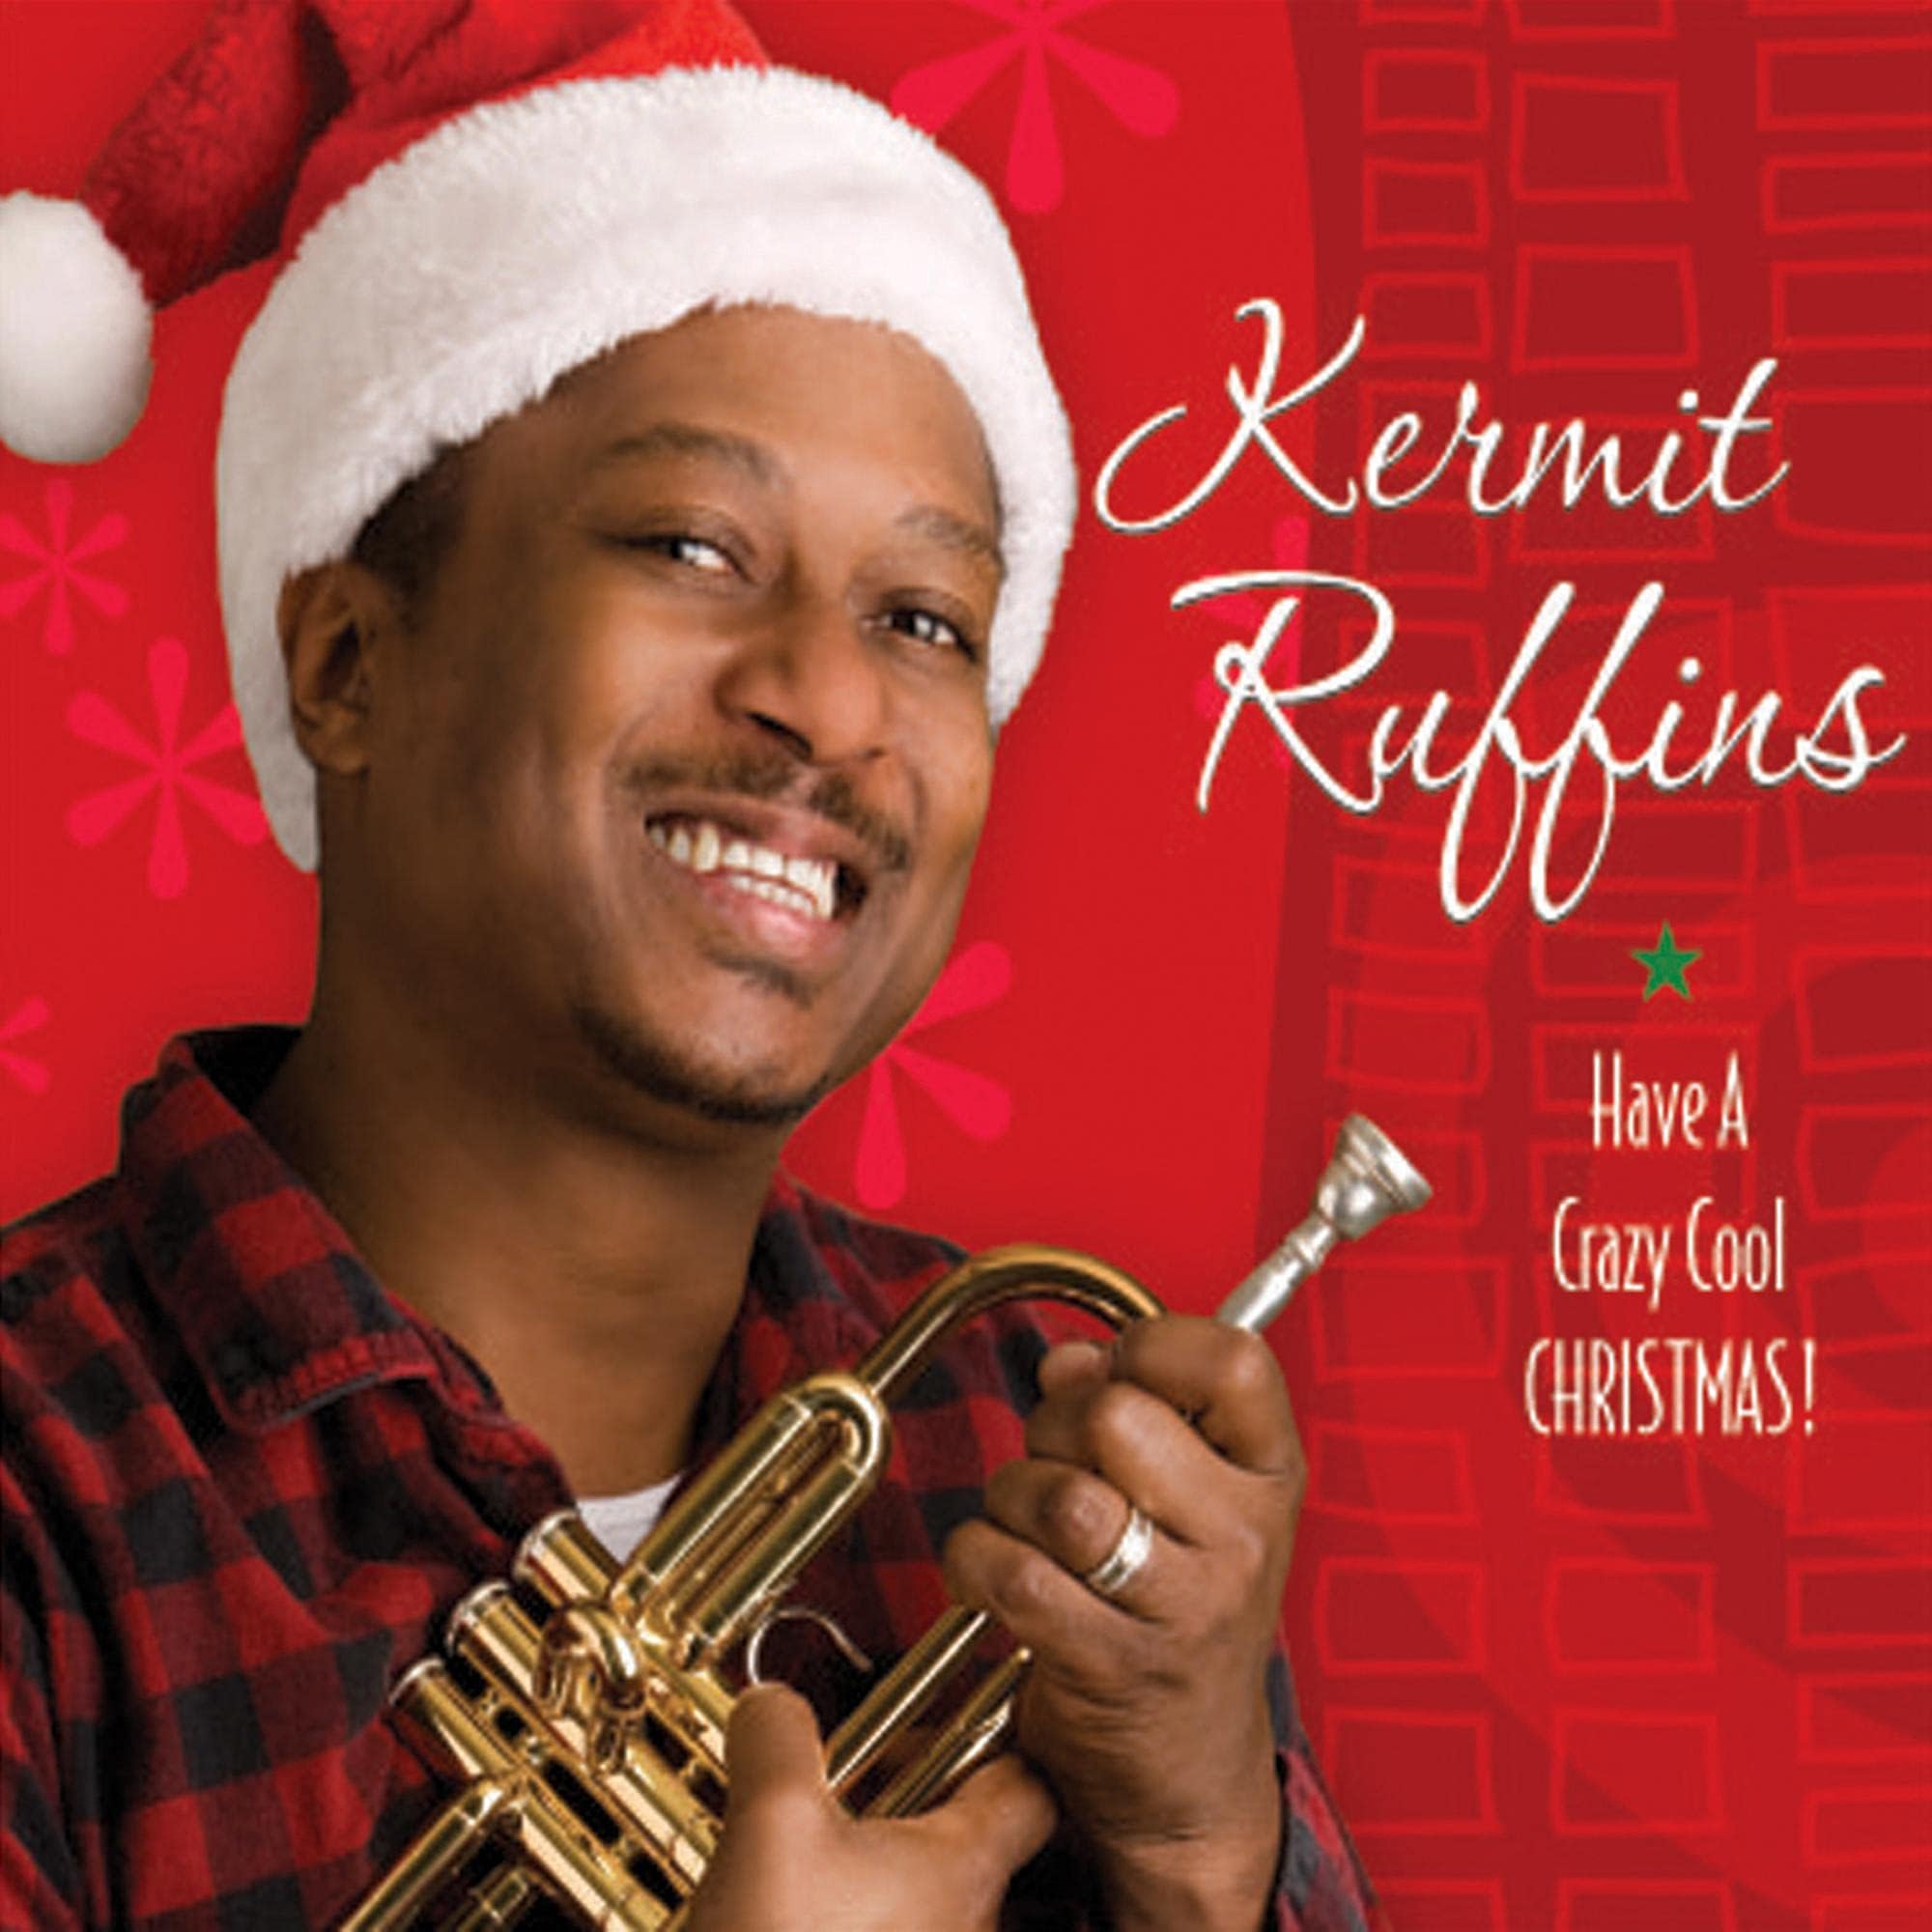 Kermit Ruffins - Have A Crazy Cool Christmas [Red Vinyl]